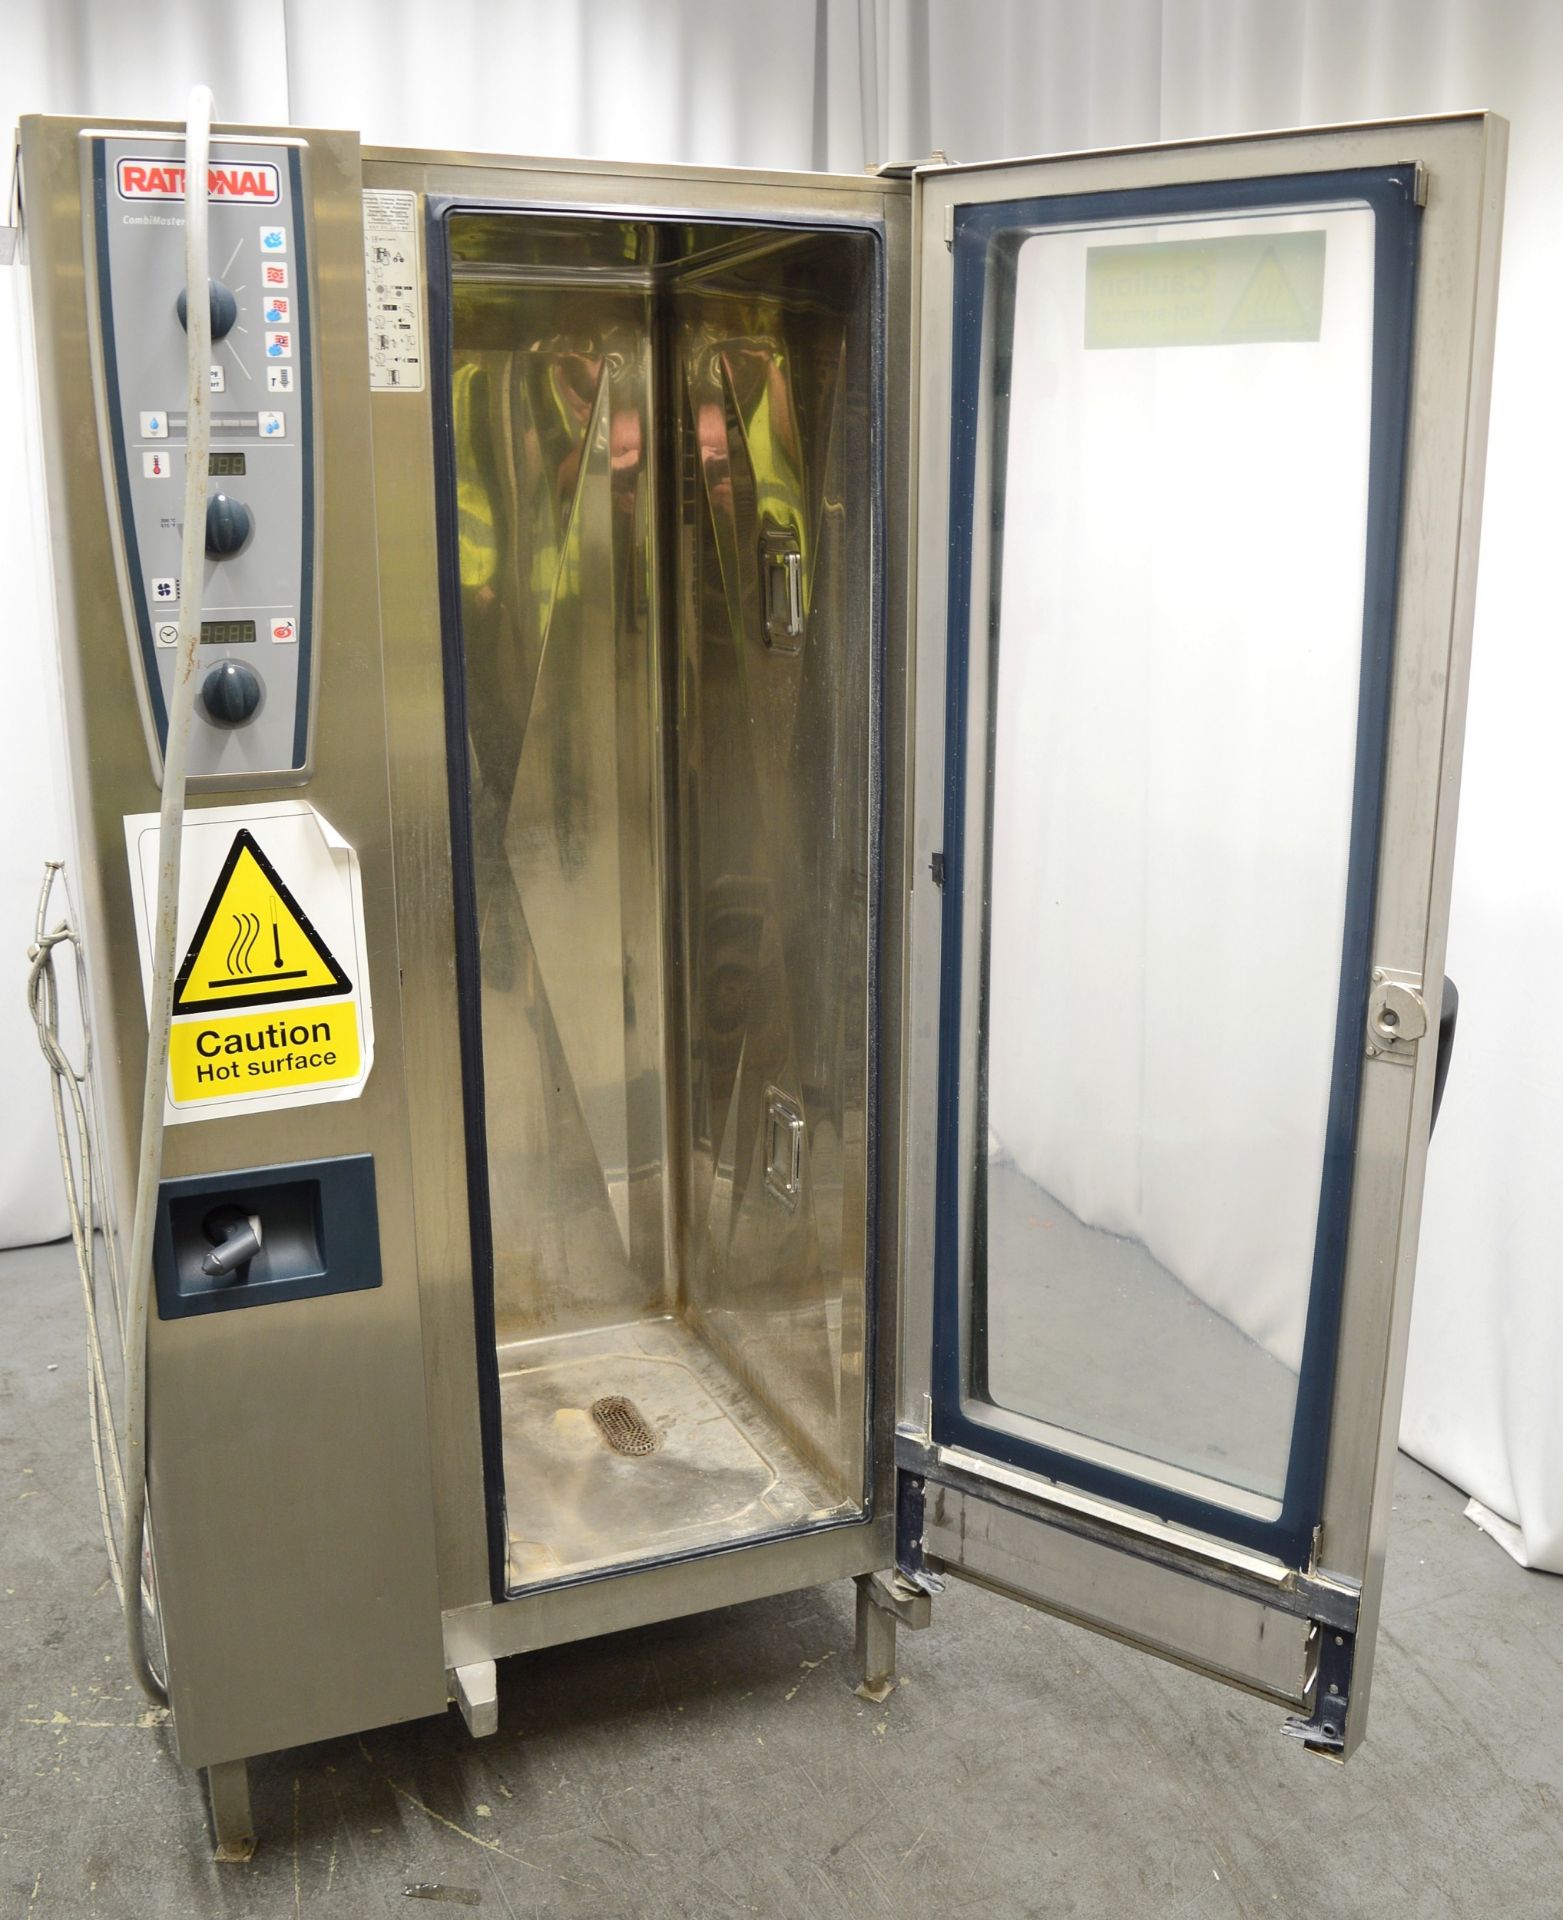 Rational CMP 201/01 20 Rack Combi Oven 3 Phase 37kW with Trolley. - Image 6 of 8